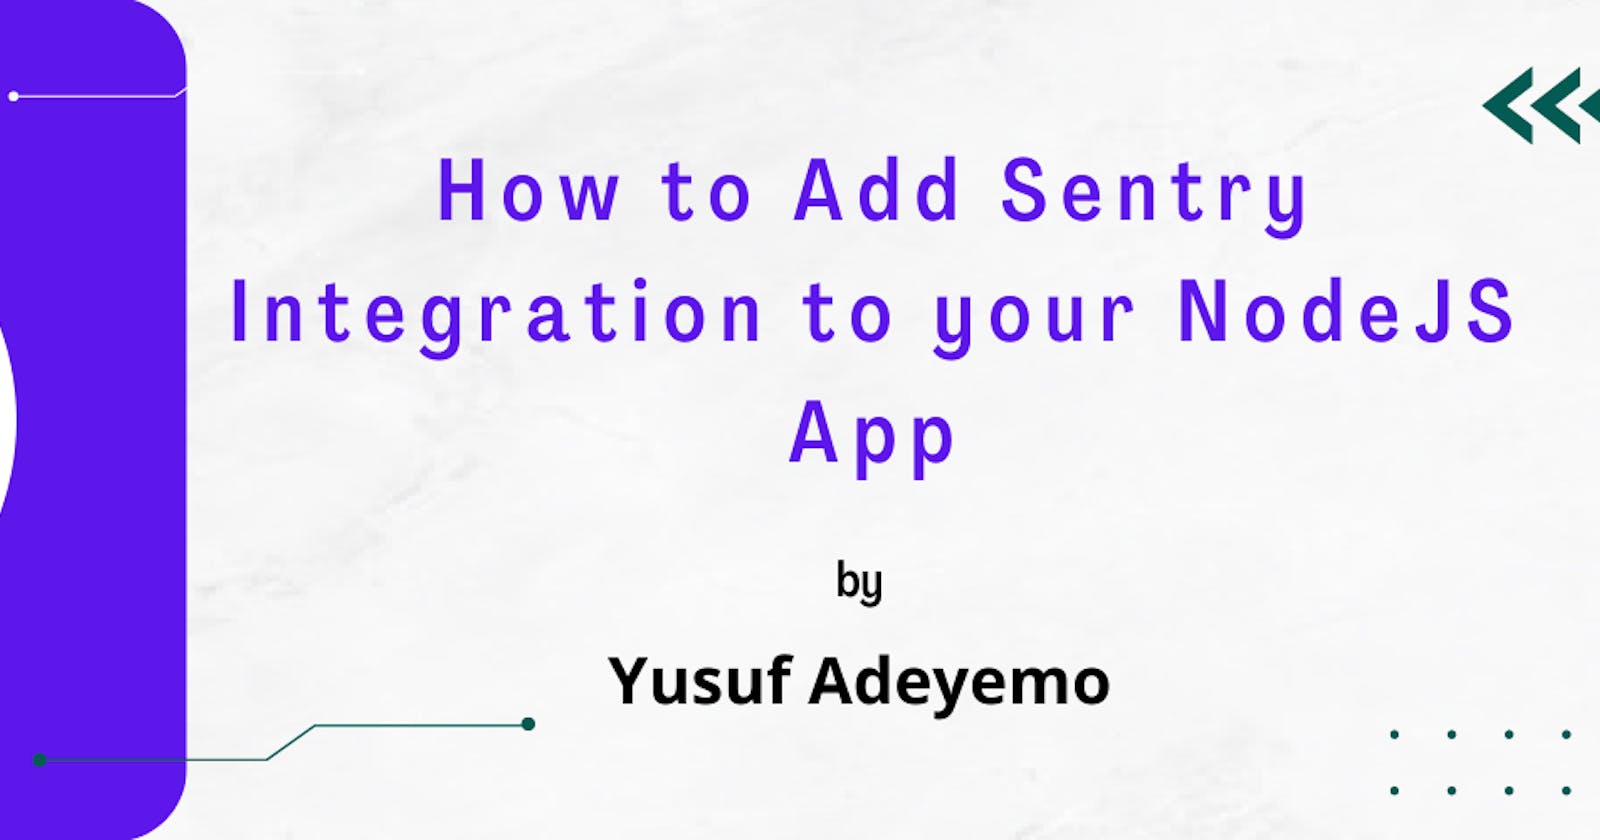 How to Add Sentry Integration to your NodeJS App